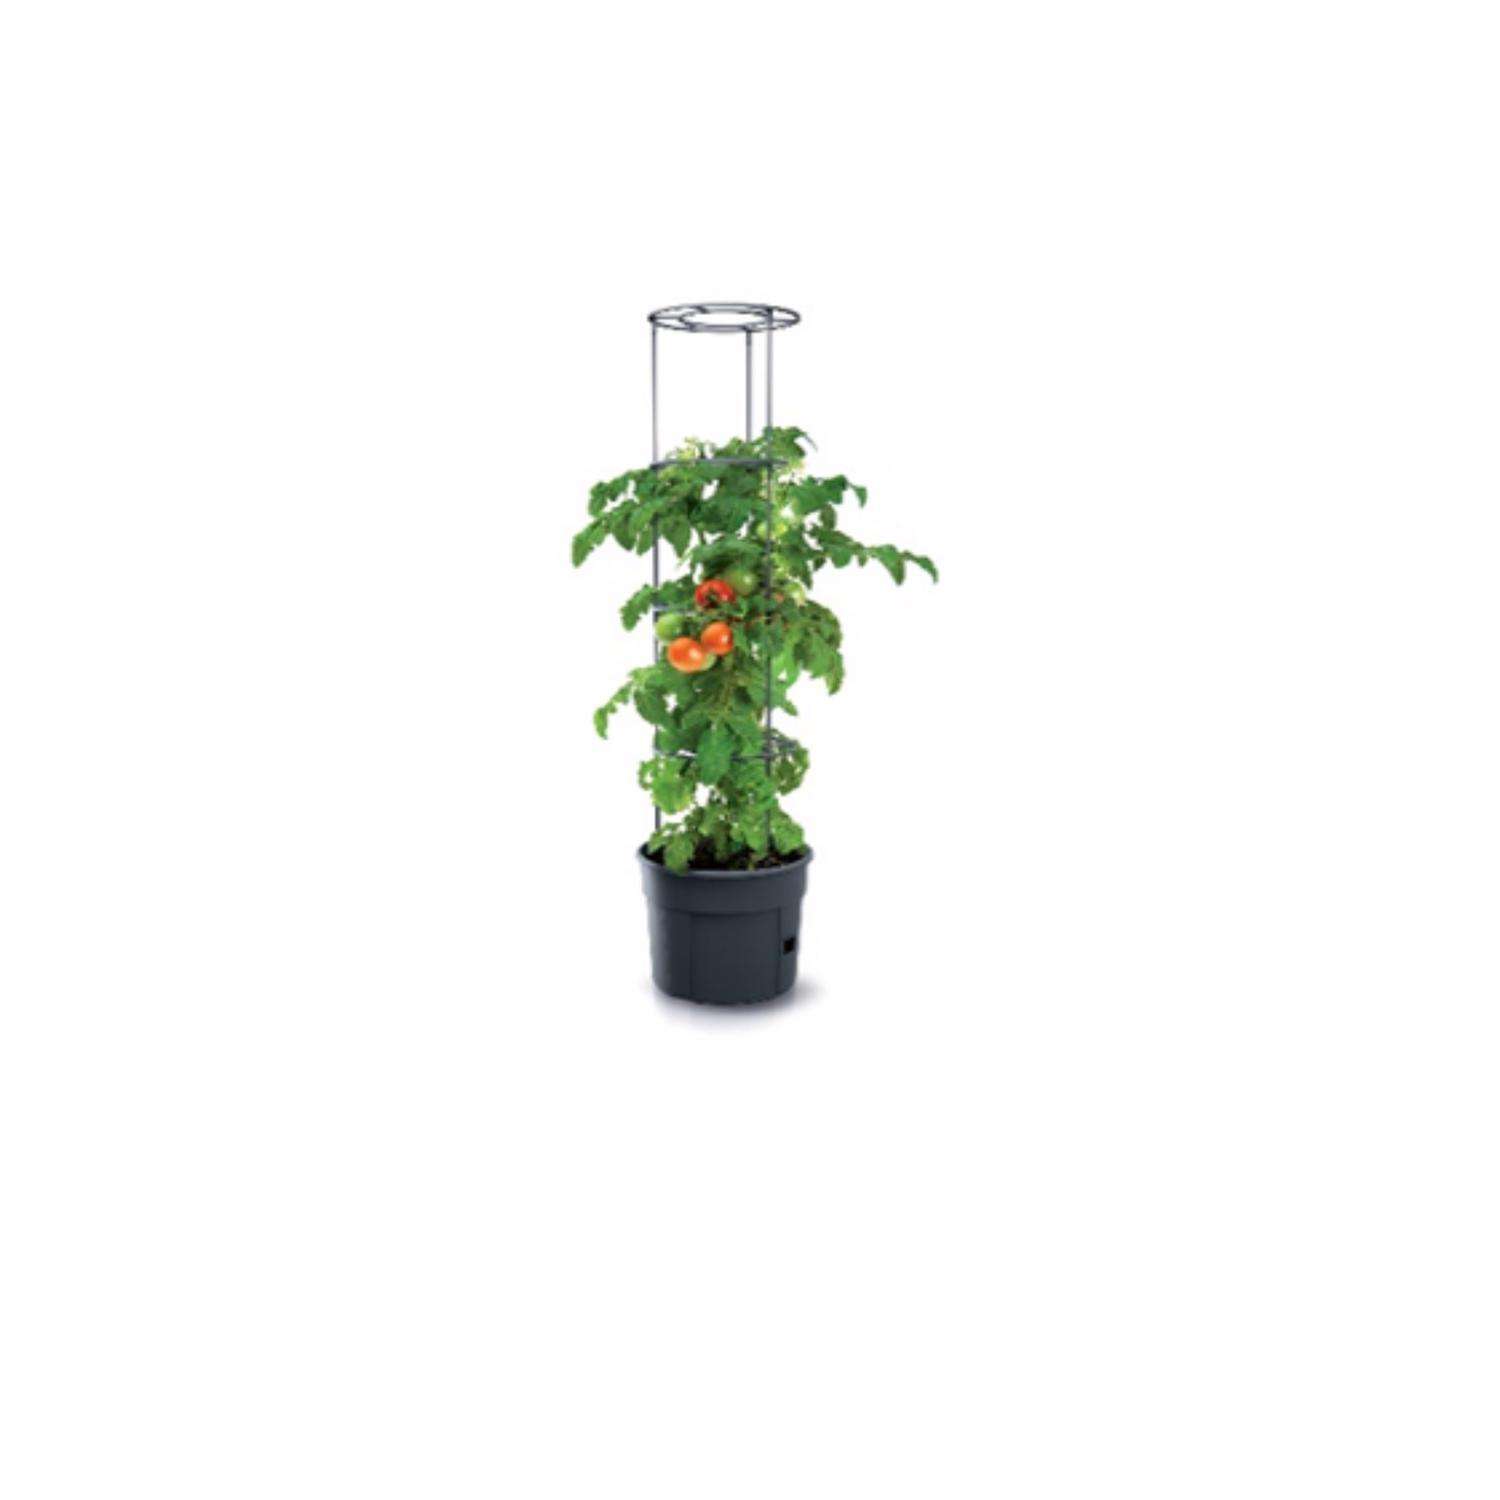 Root Bound Tomato Plants  Signs & Fixes - Farm to Jar